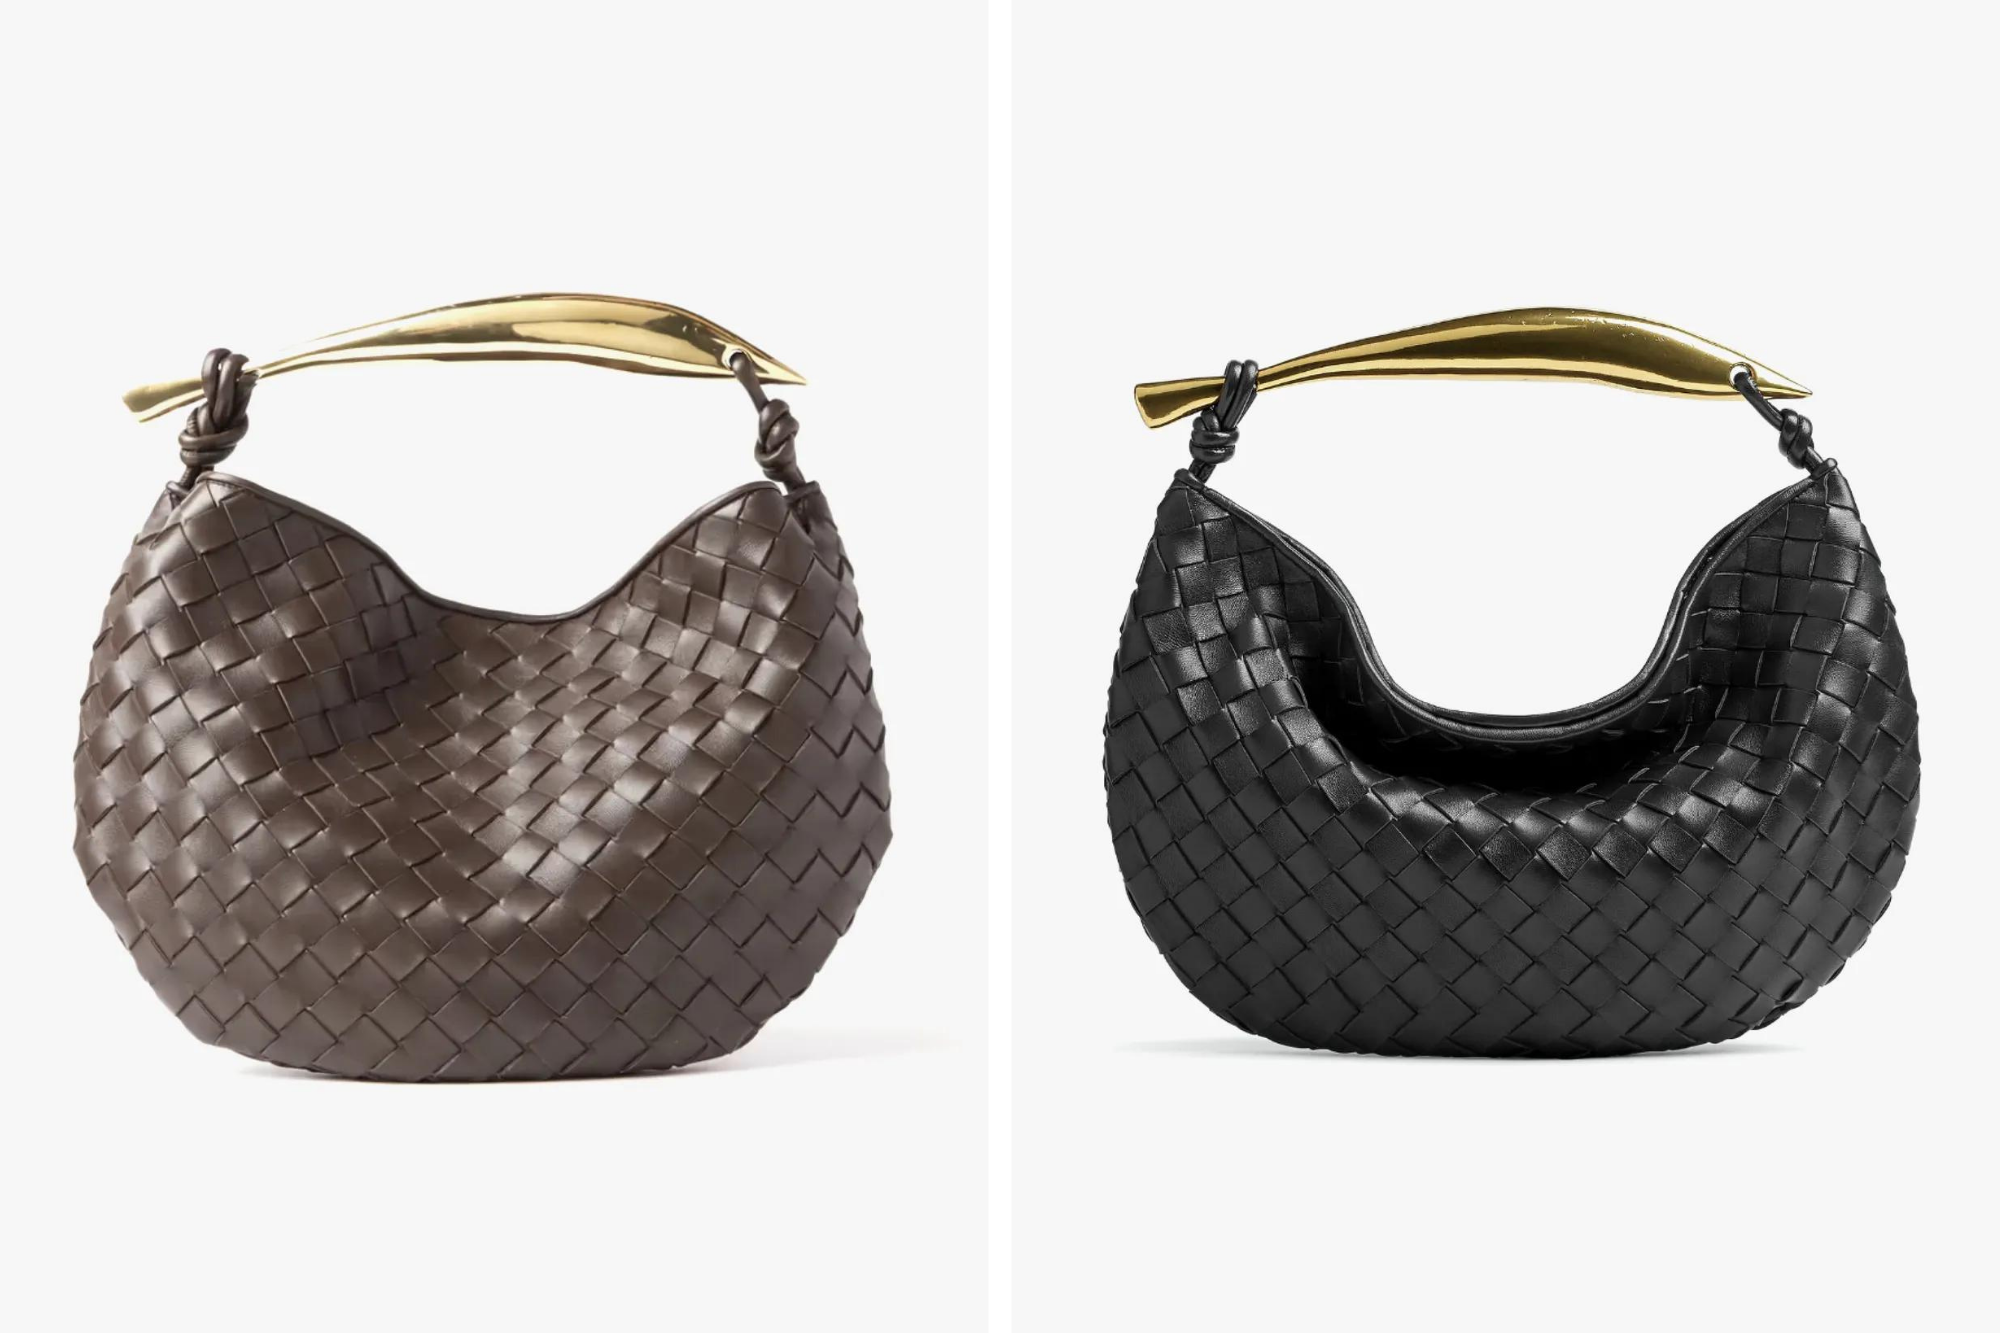 3 Secondhand Designer Handbags to Buy for Fall